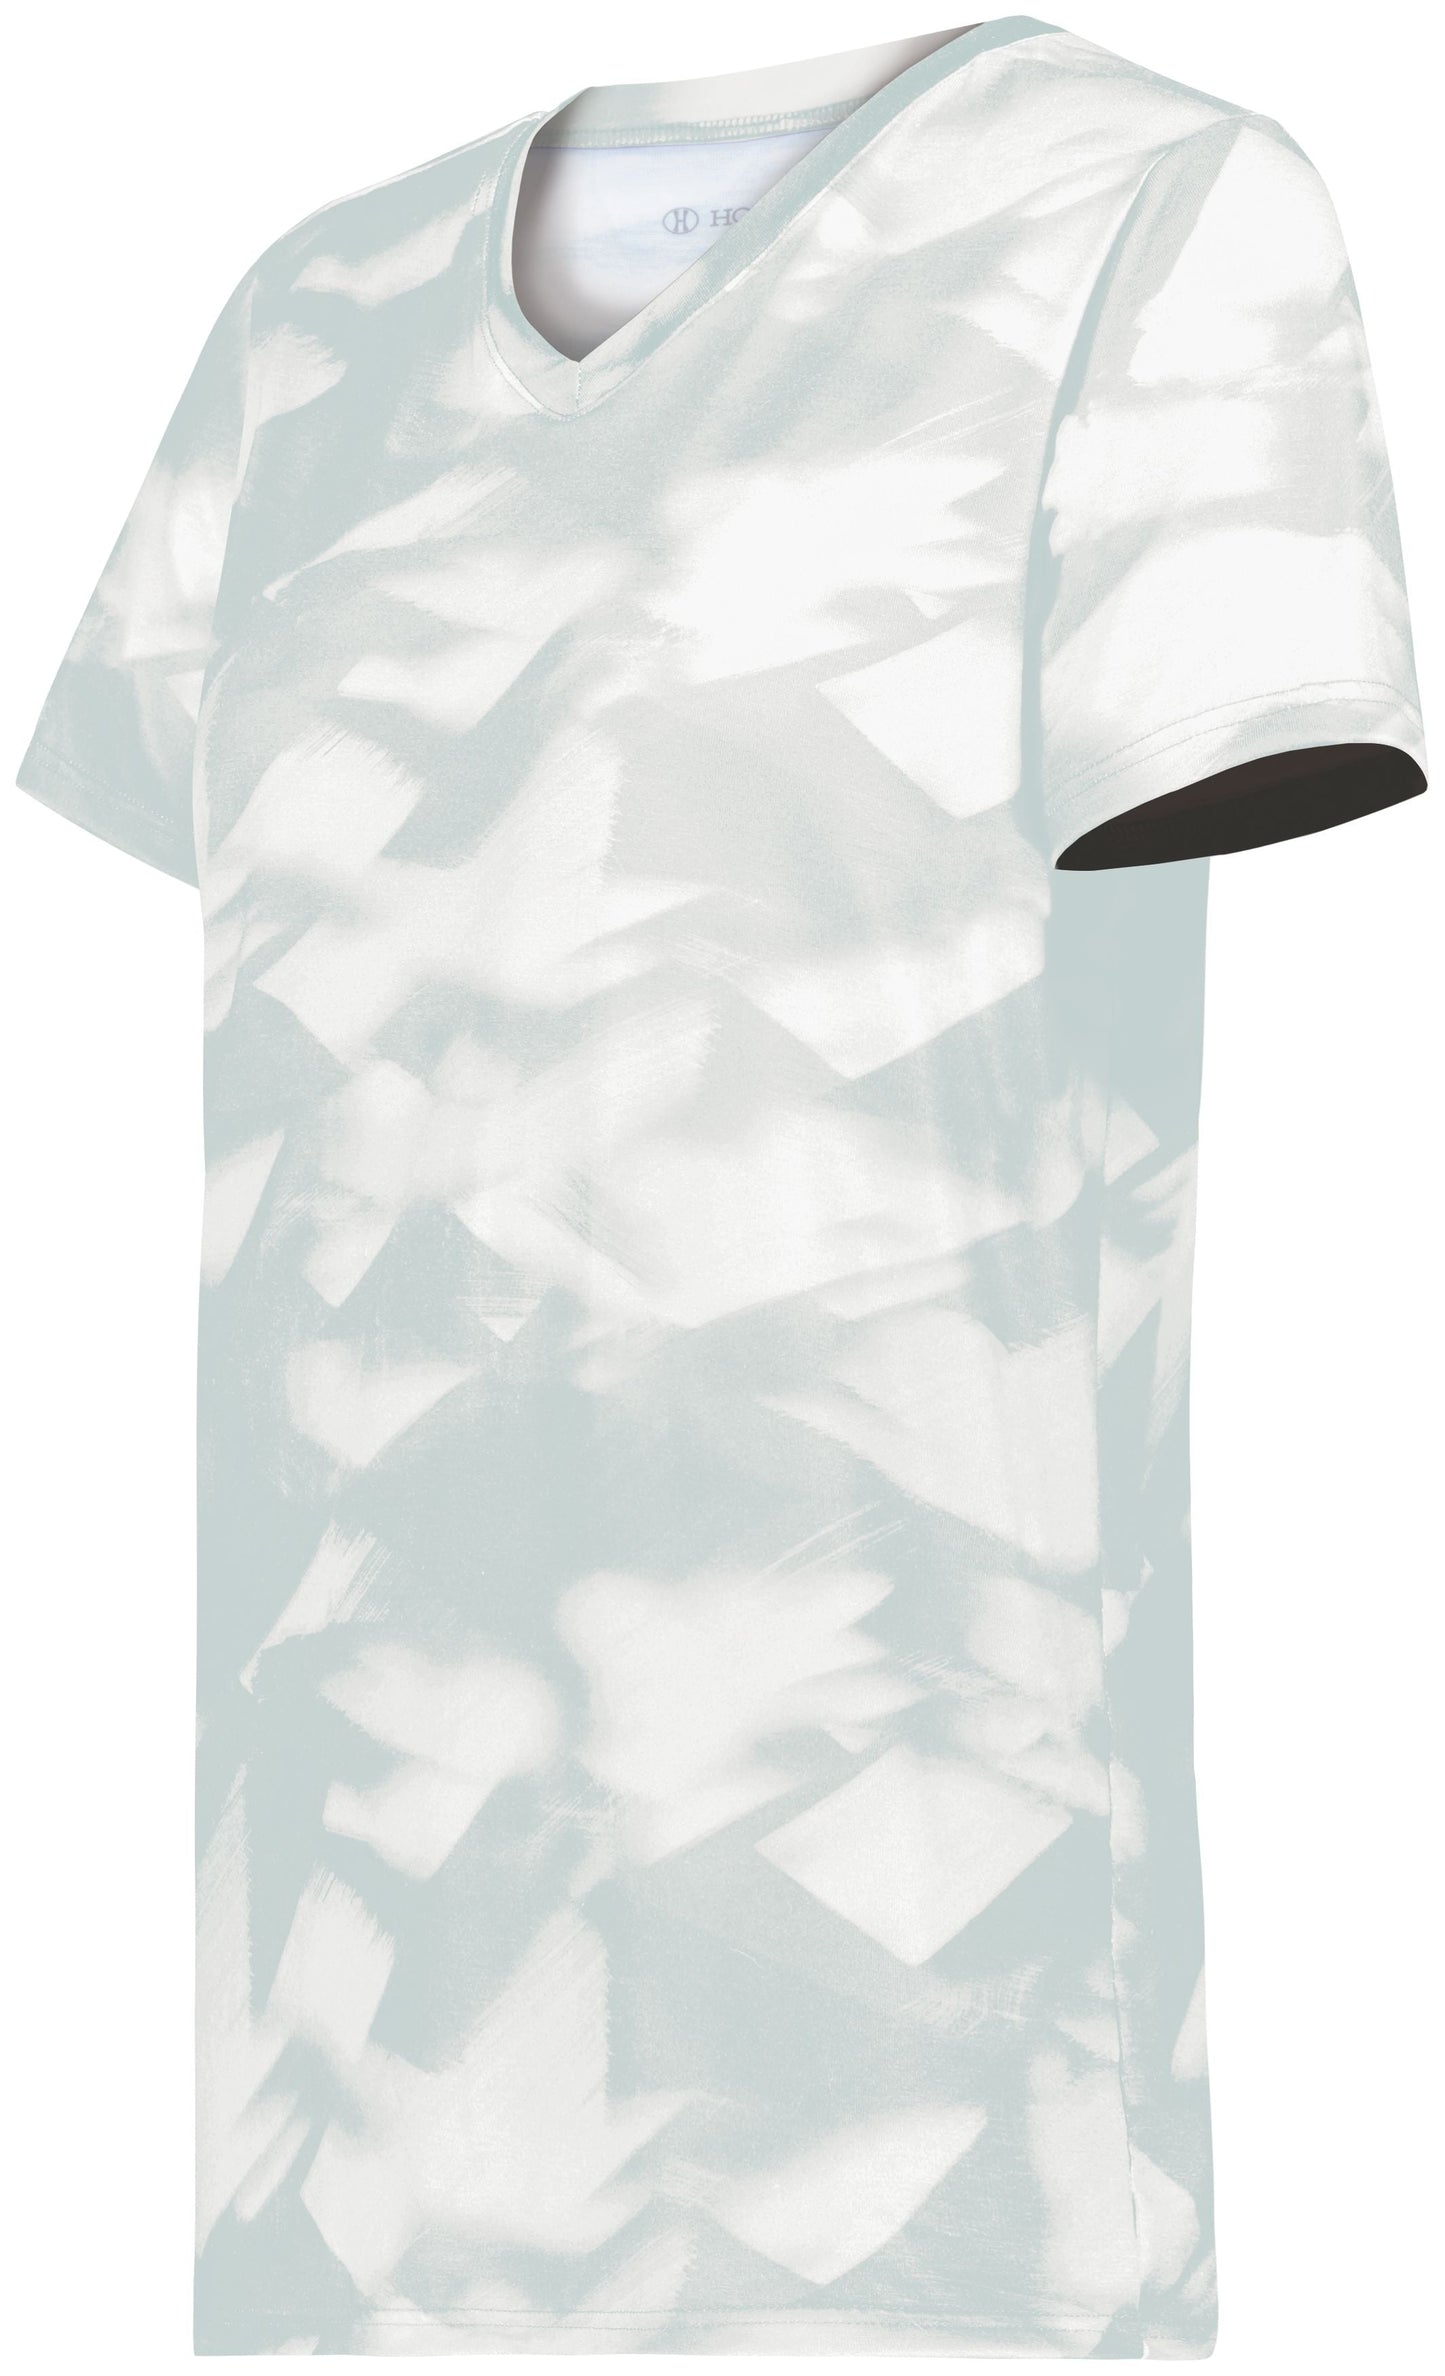 HOLLOWAY - LADIES STOCK COTTON-TOUCH™ POLY TEE